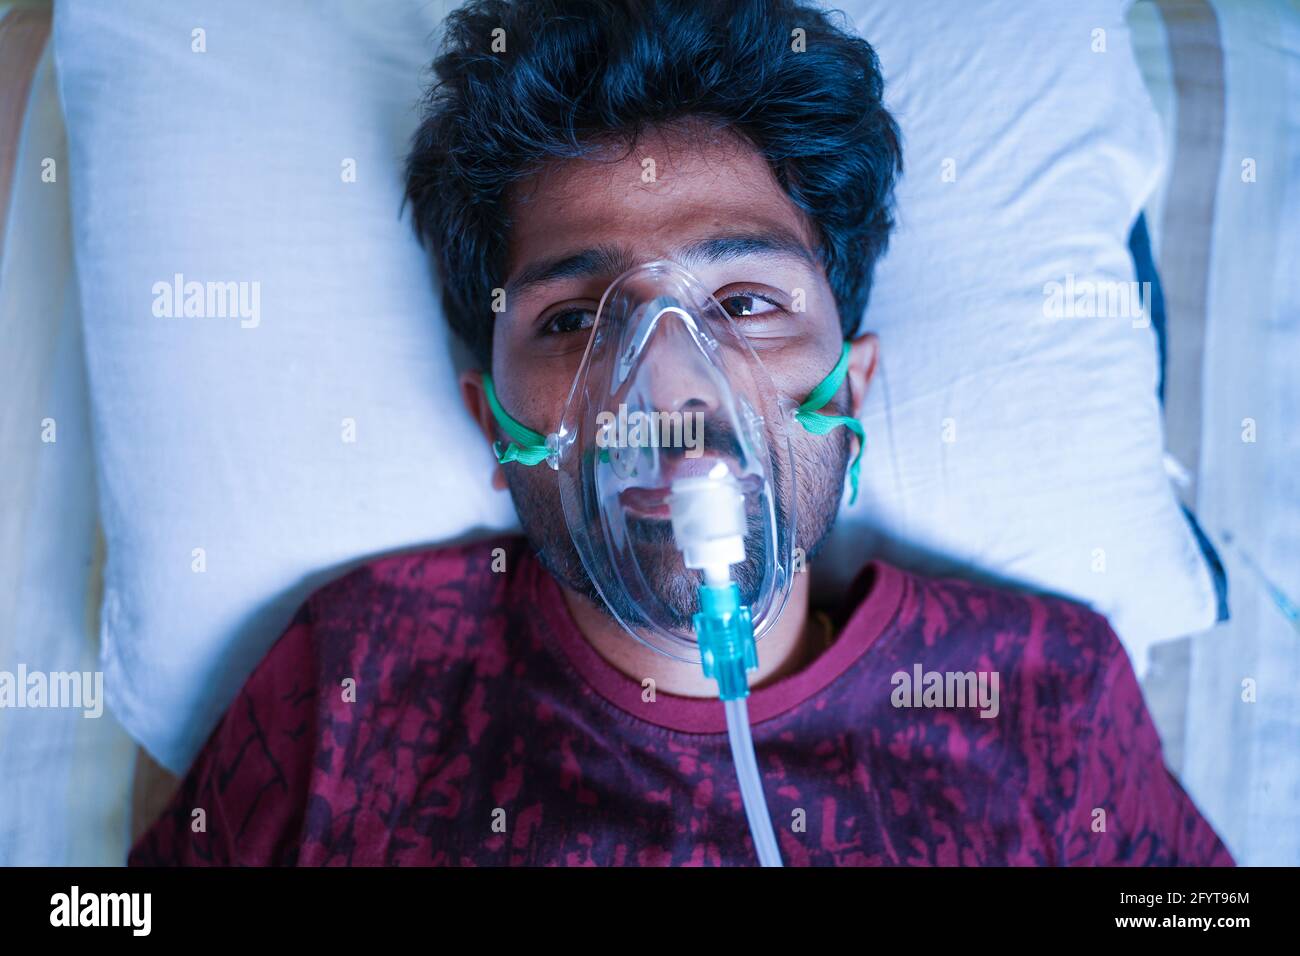 Top View of young man breathing on ventilator or oxygen concentrator mask at hospital due coronavirus covid-19 dyspnea or shortness of breath - Stock Photo